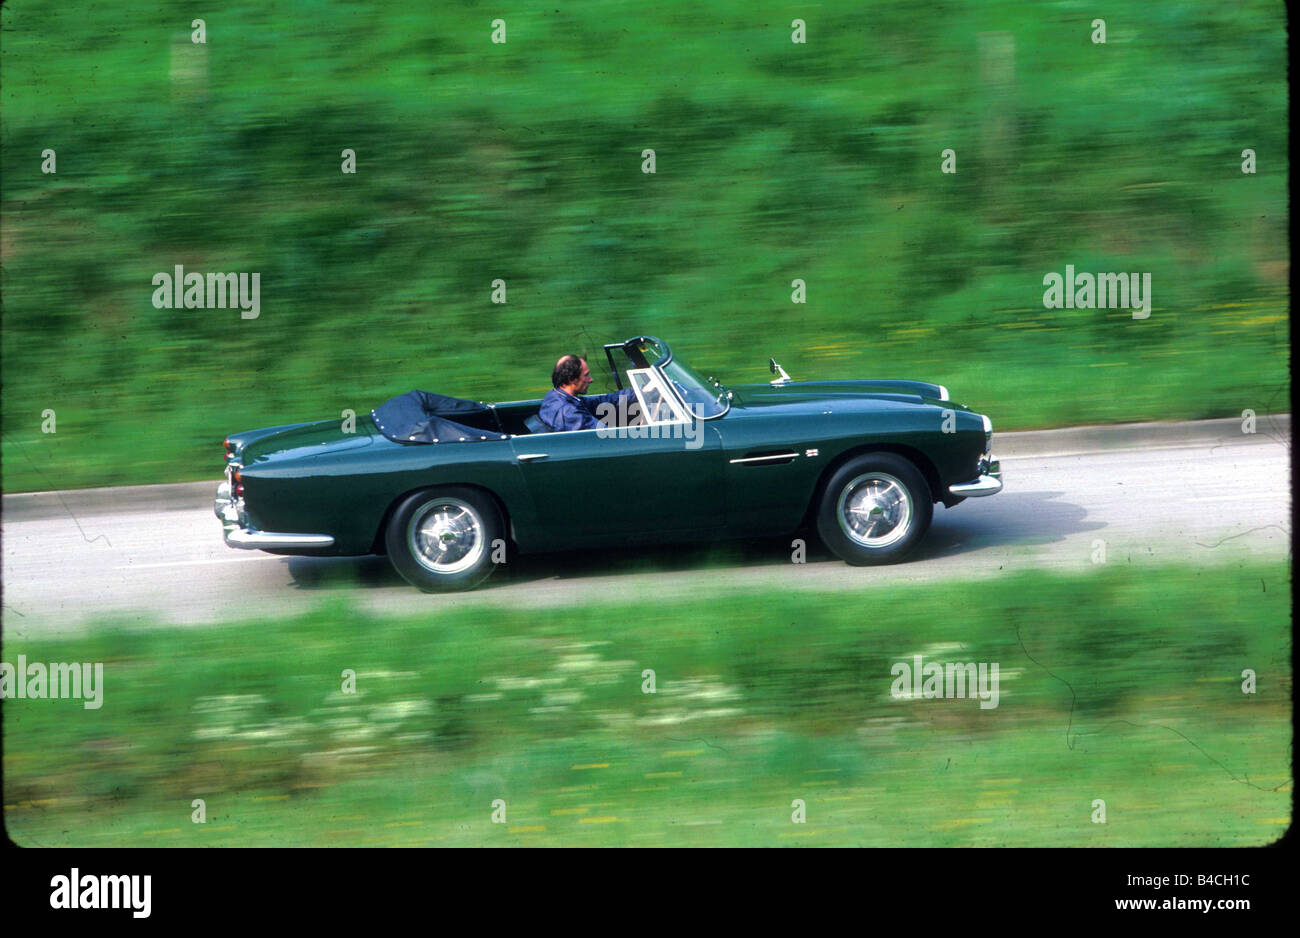 Car, Aston Martin DB4, Convertible, Vintage approx., Convertible, model year 1962-1963, green, sixties, driving, country road, s Stock Photo